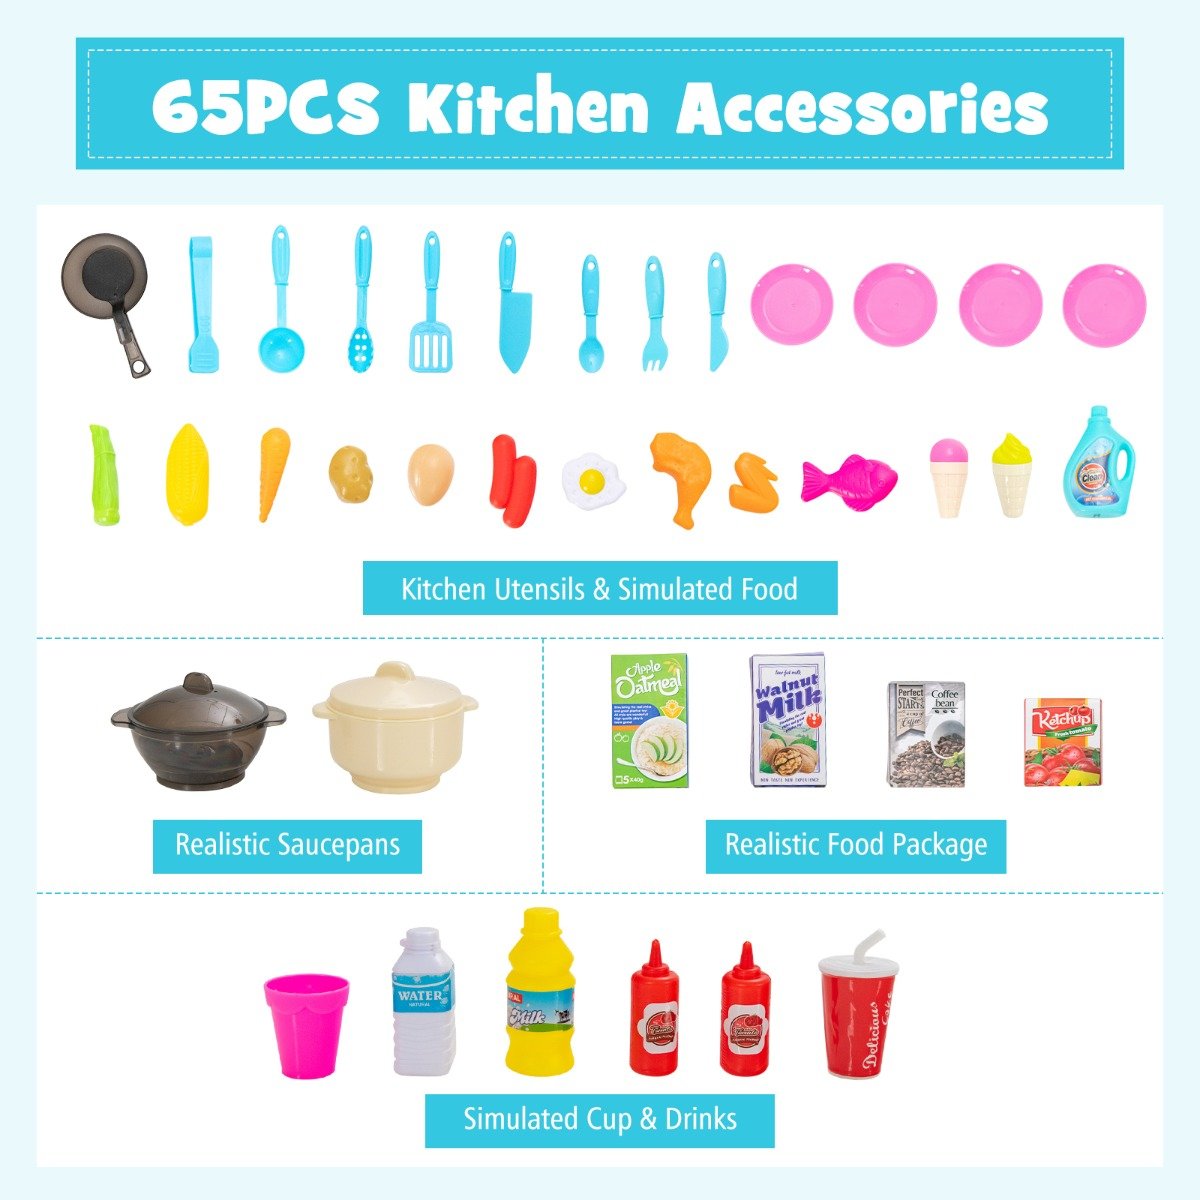 Pretend Play Delight: Play Kitchen Set with 65-Piece Accessories & Blue Steam